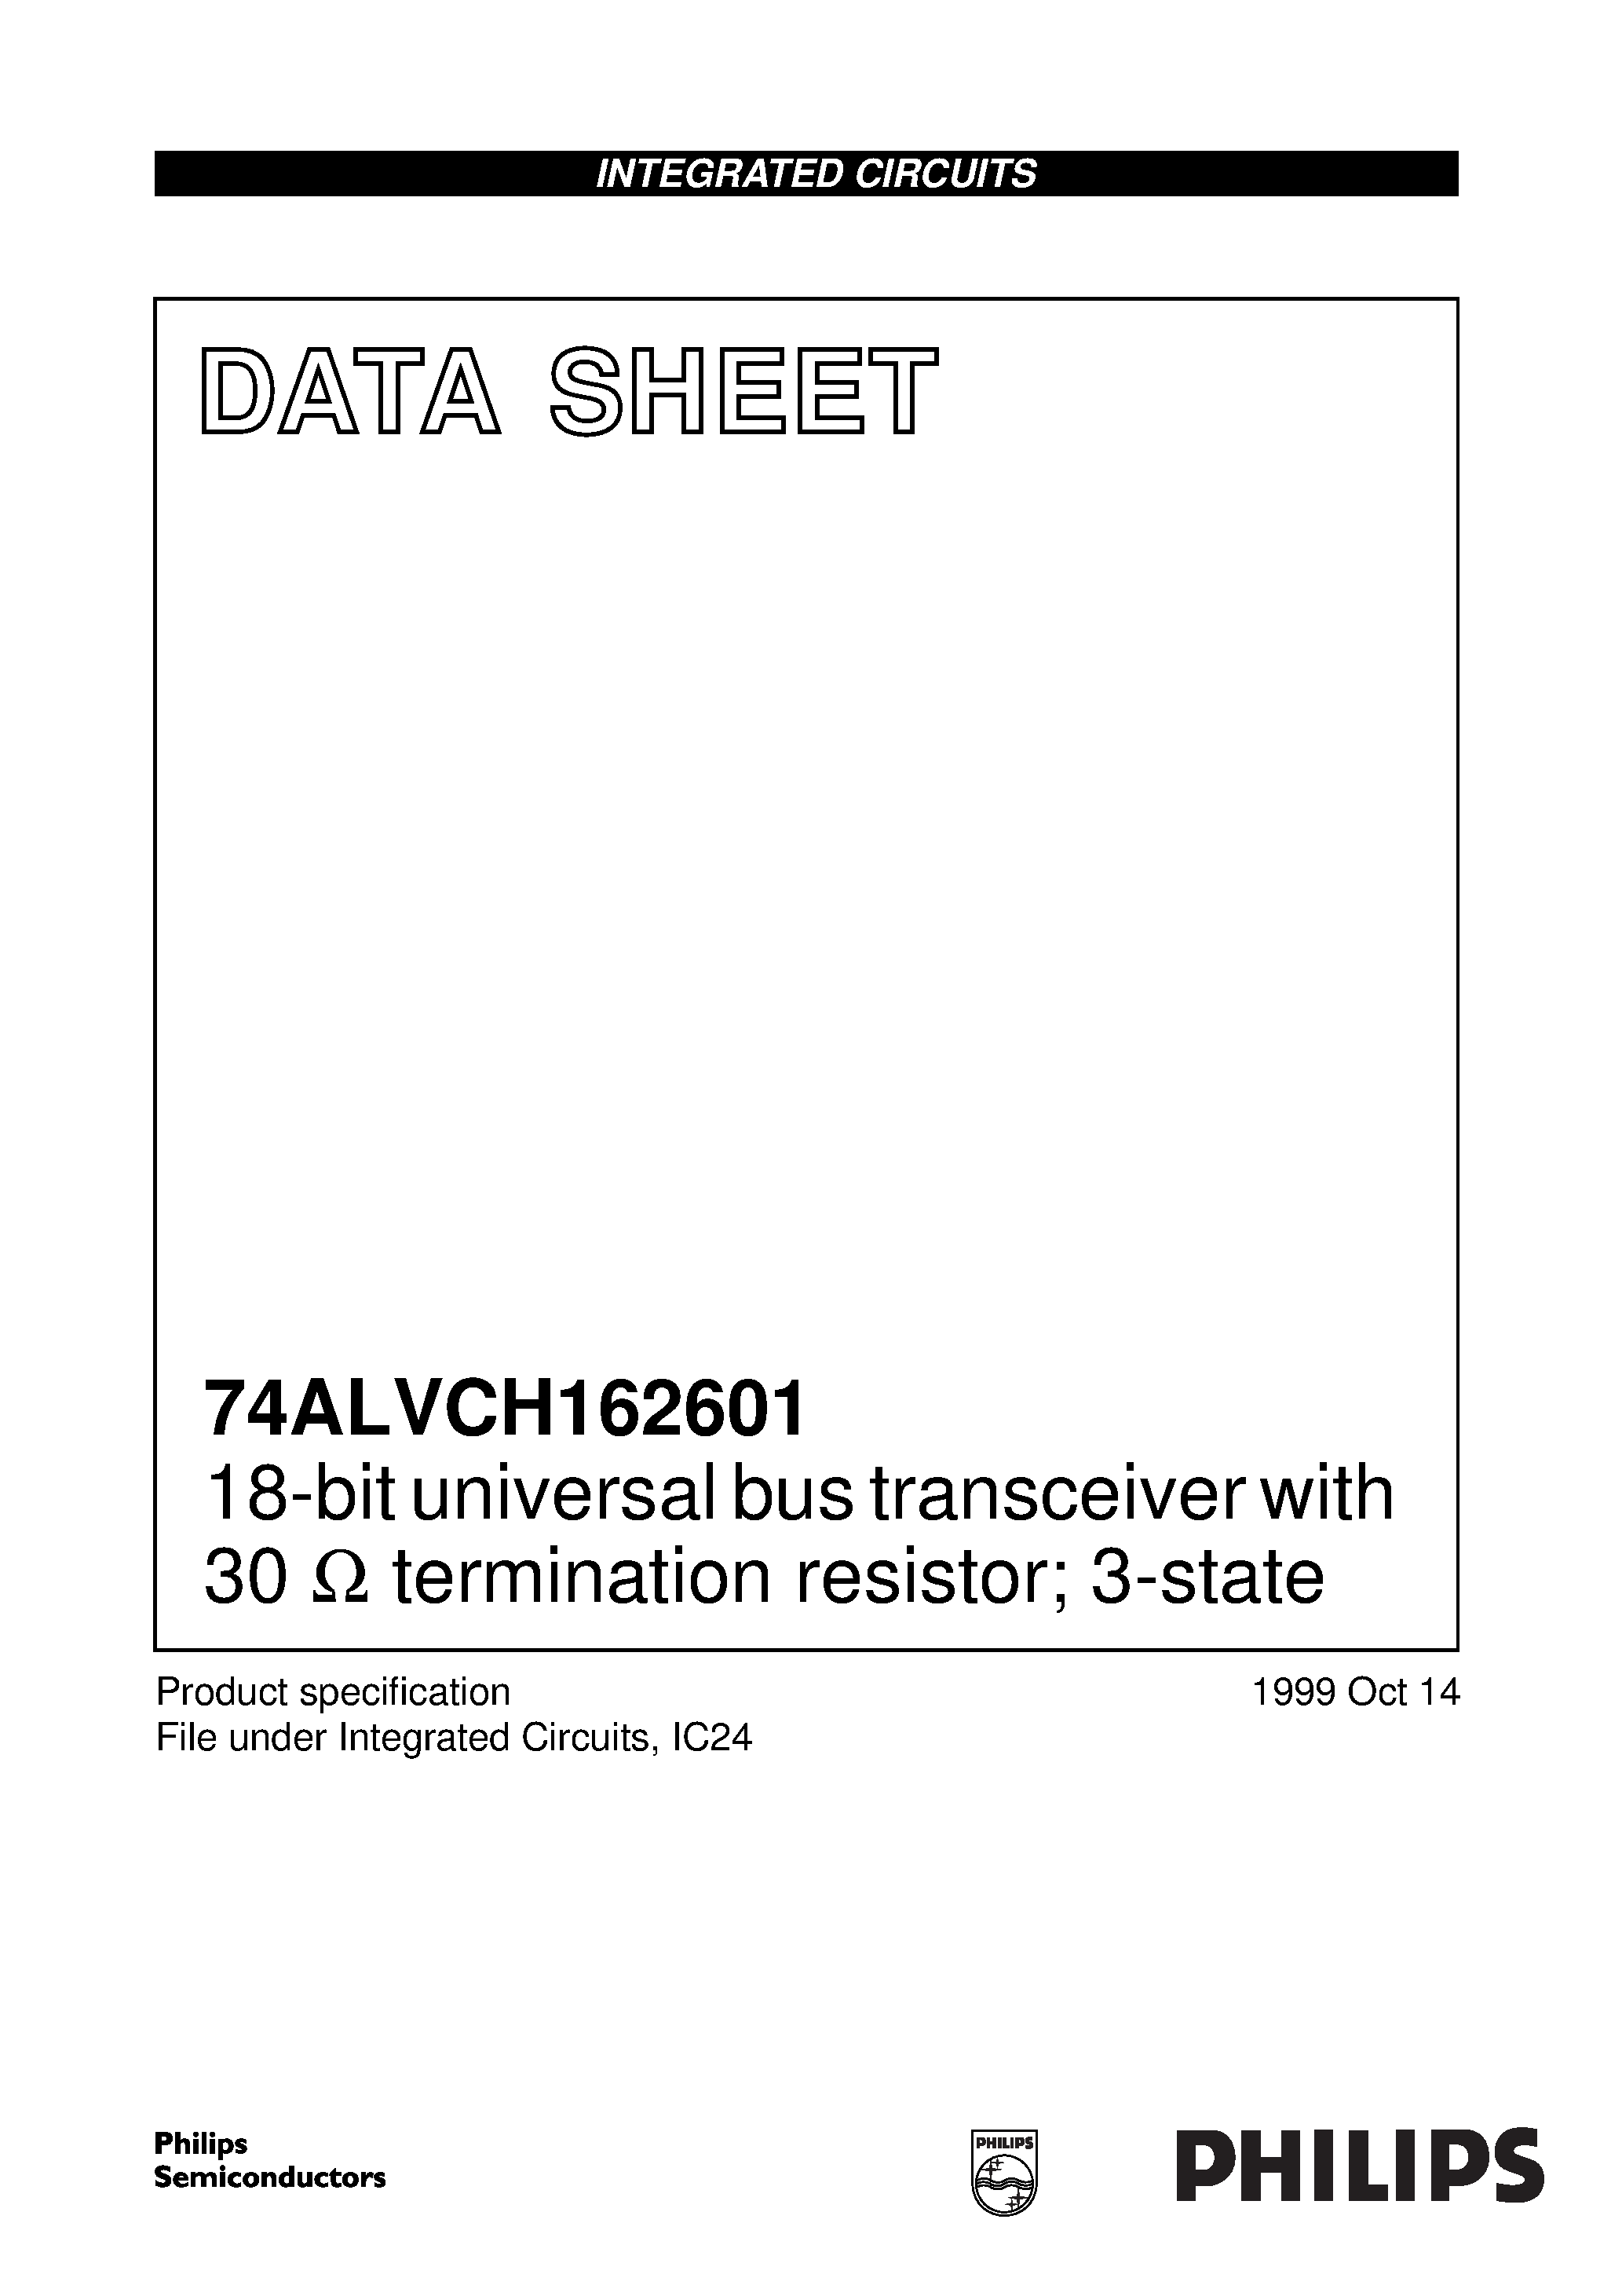 Datasheet 74ALVCH162601DGG - 18-bit universal bus transceiver with 30 ohm termination resistor; 3-state page 1